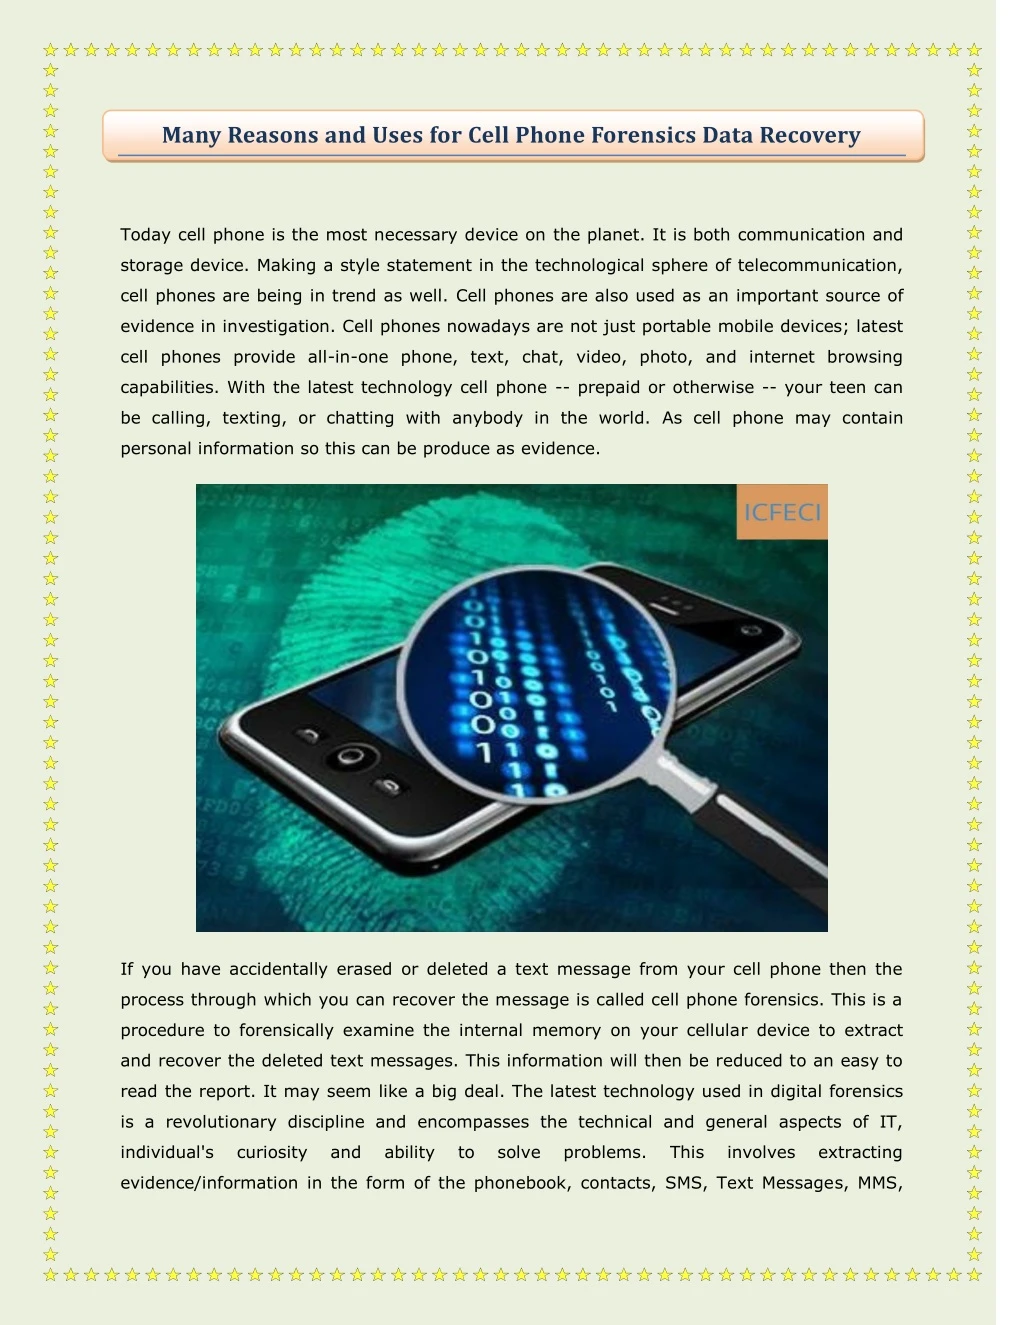 many reasons and uses for cell phone forensics